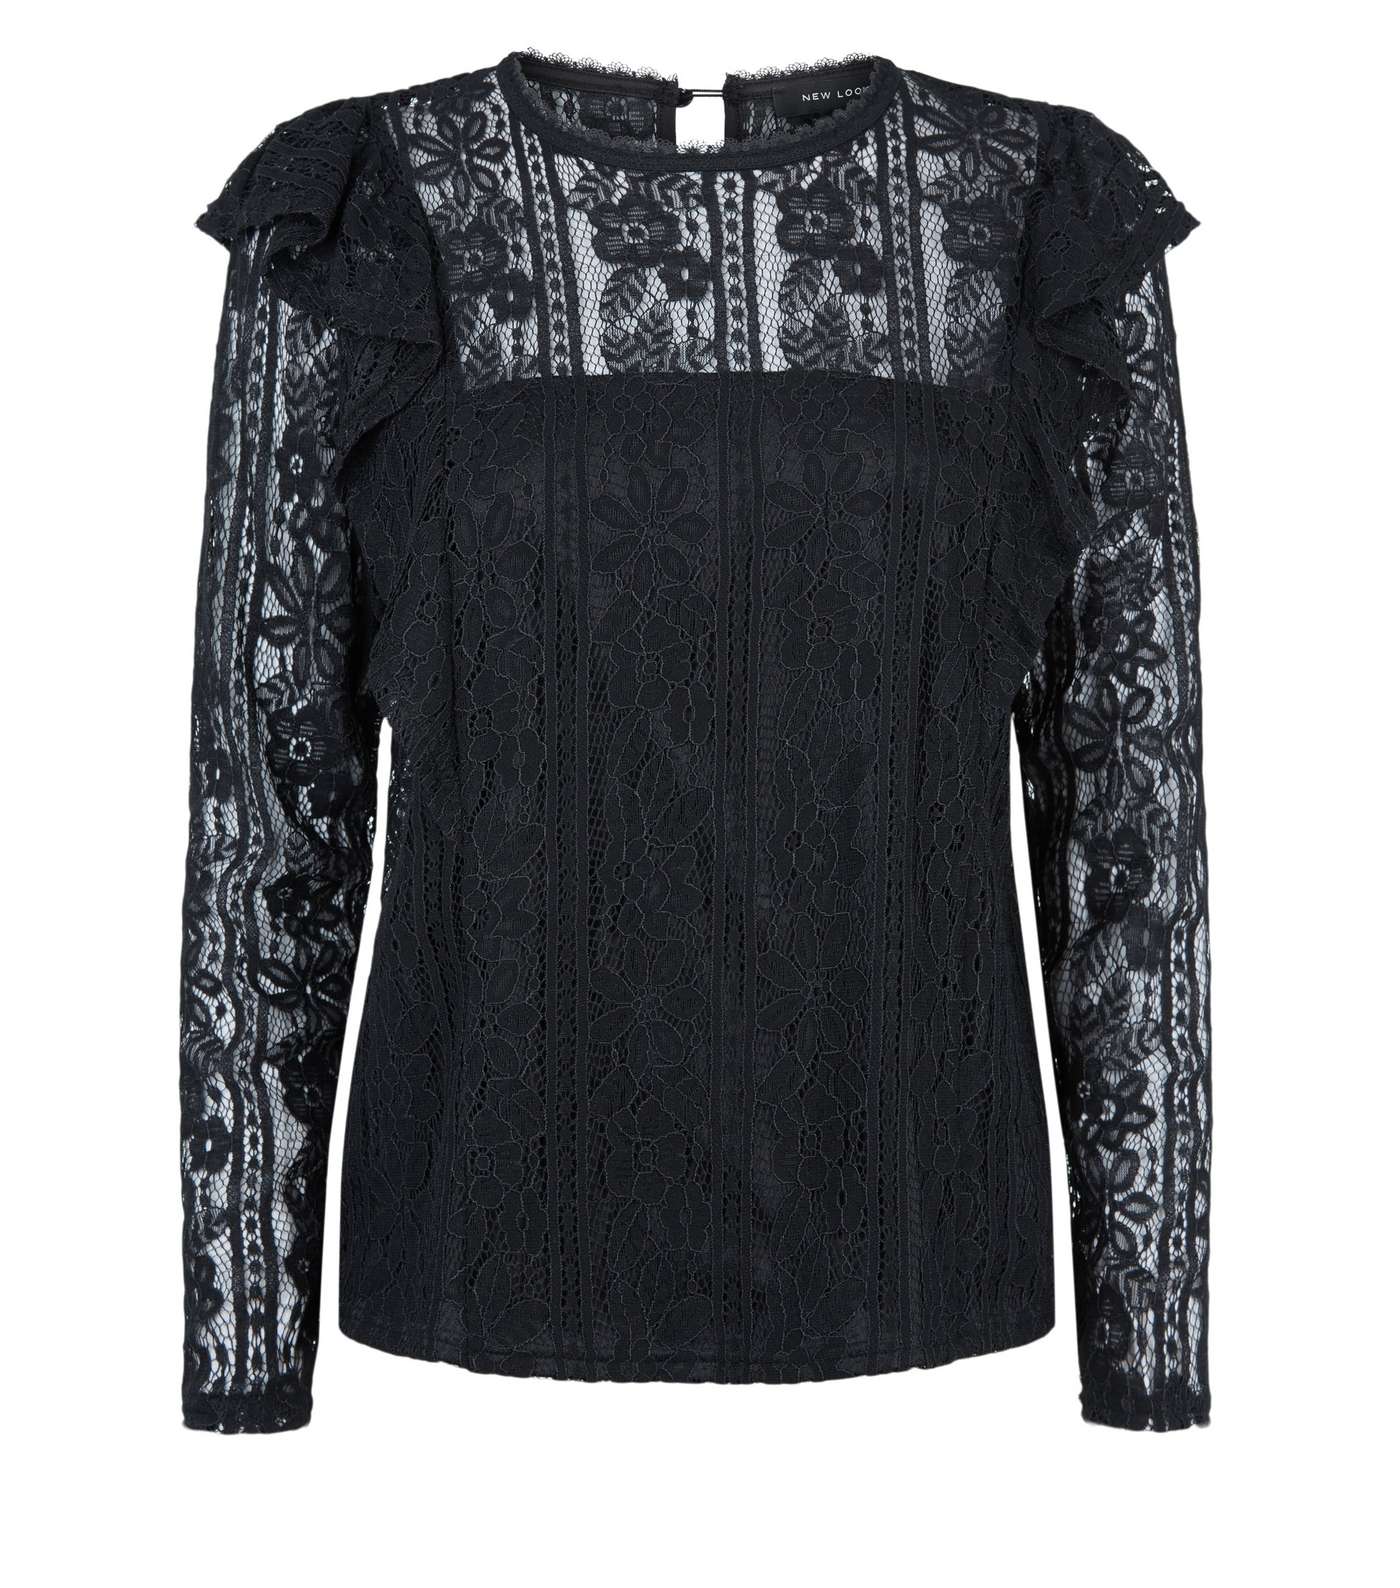 Black Lace Long Sleeve Frill Trim Top Image 4